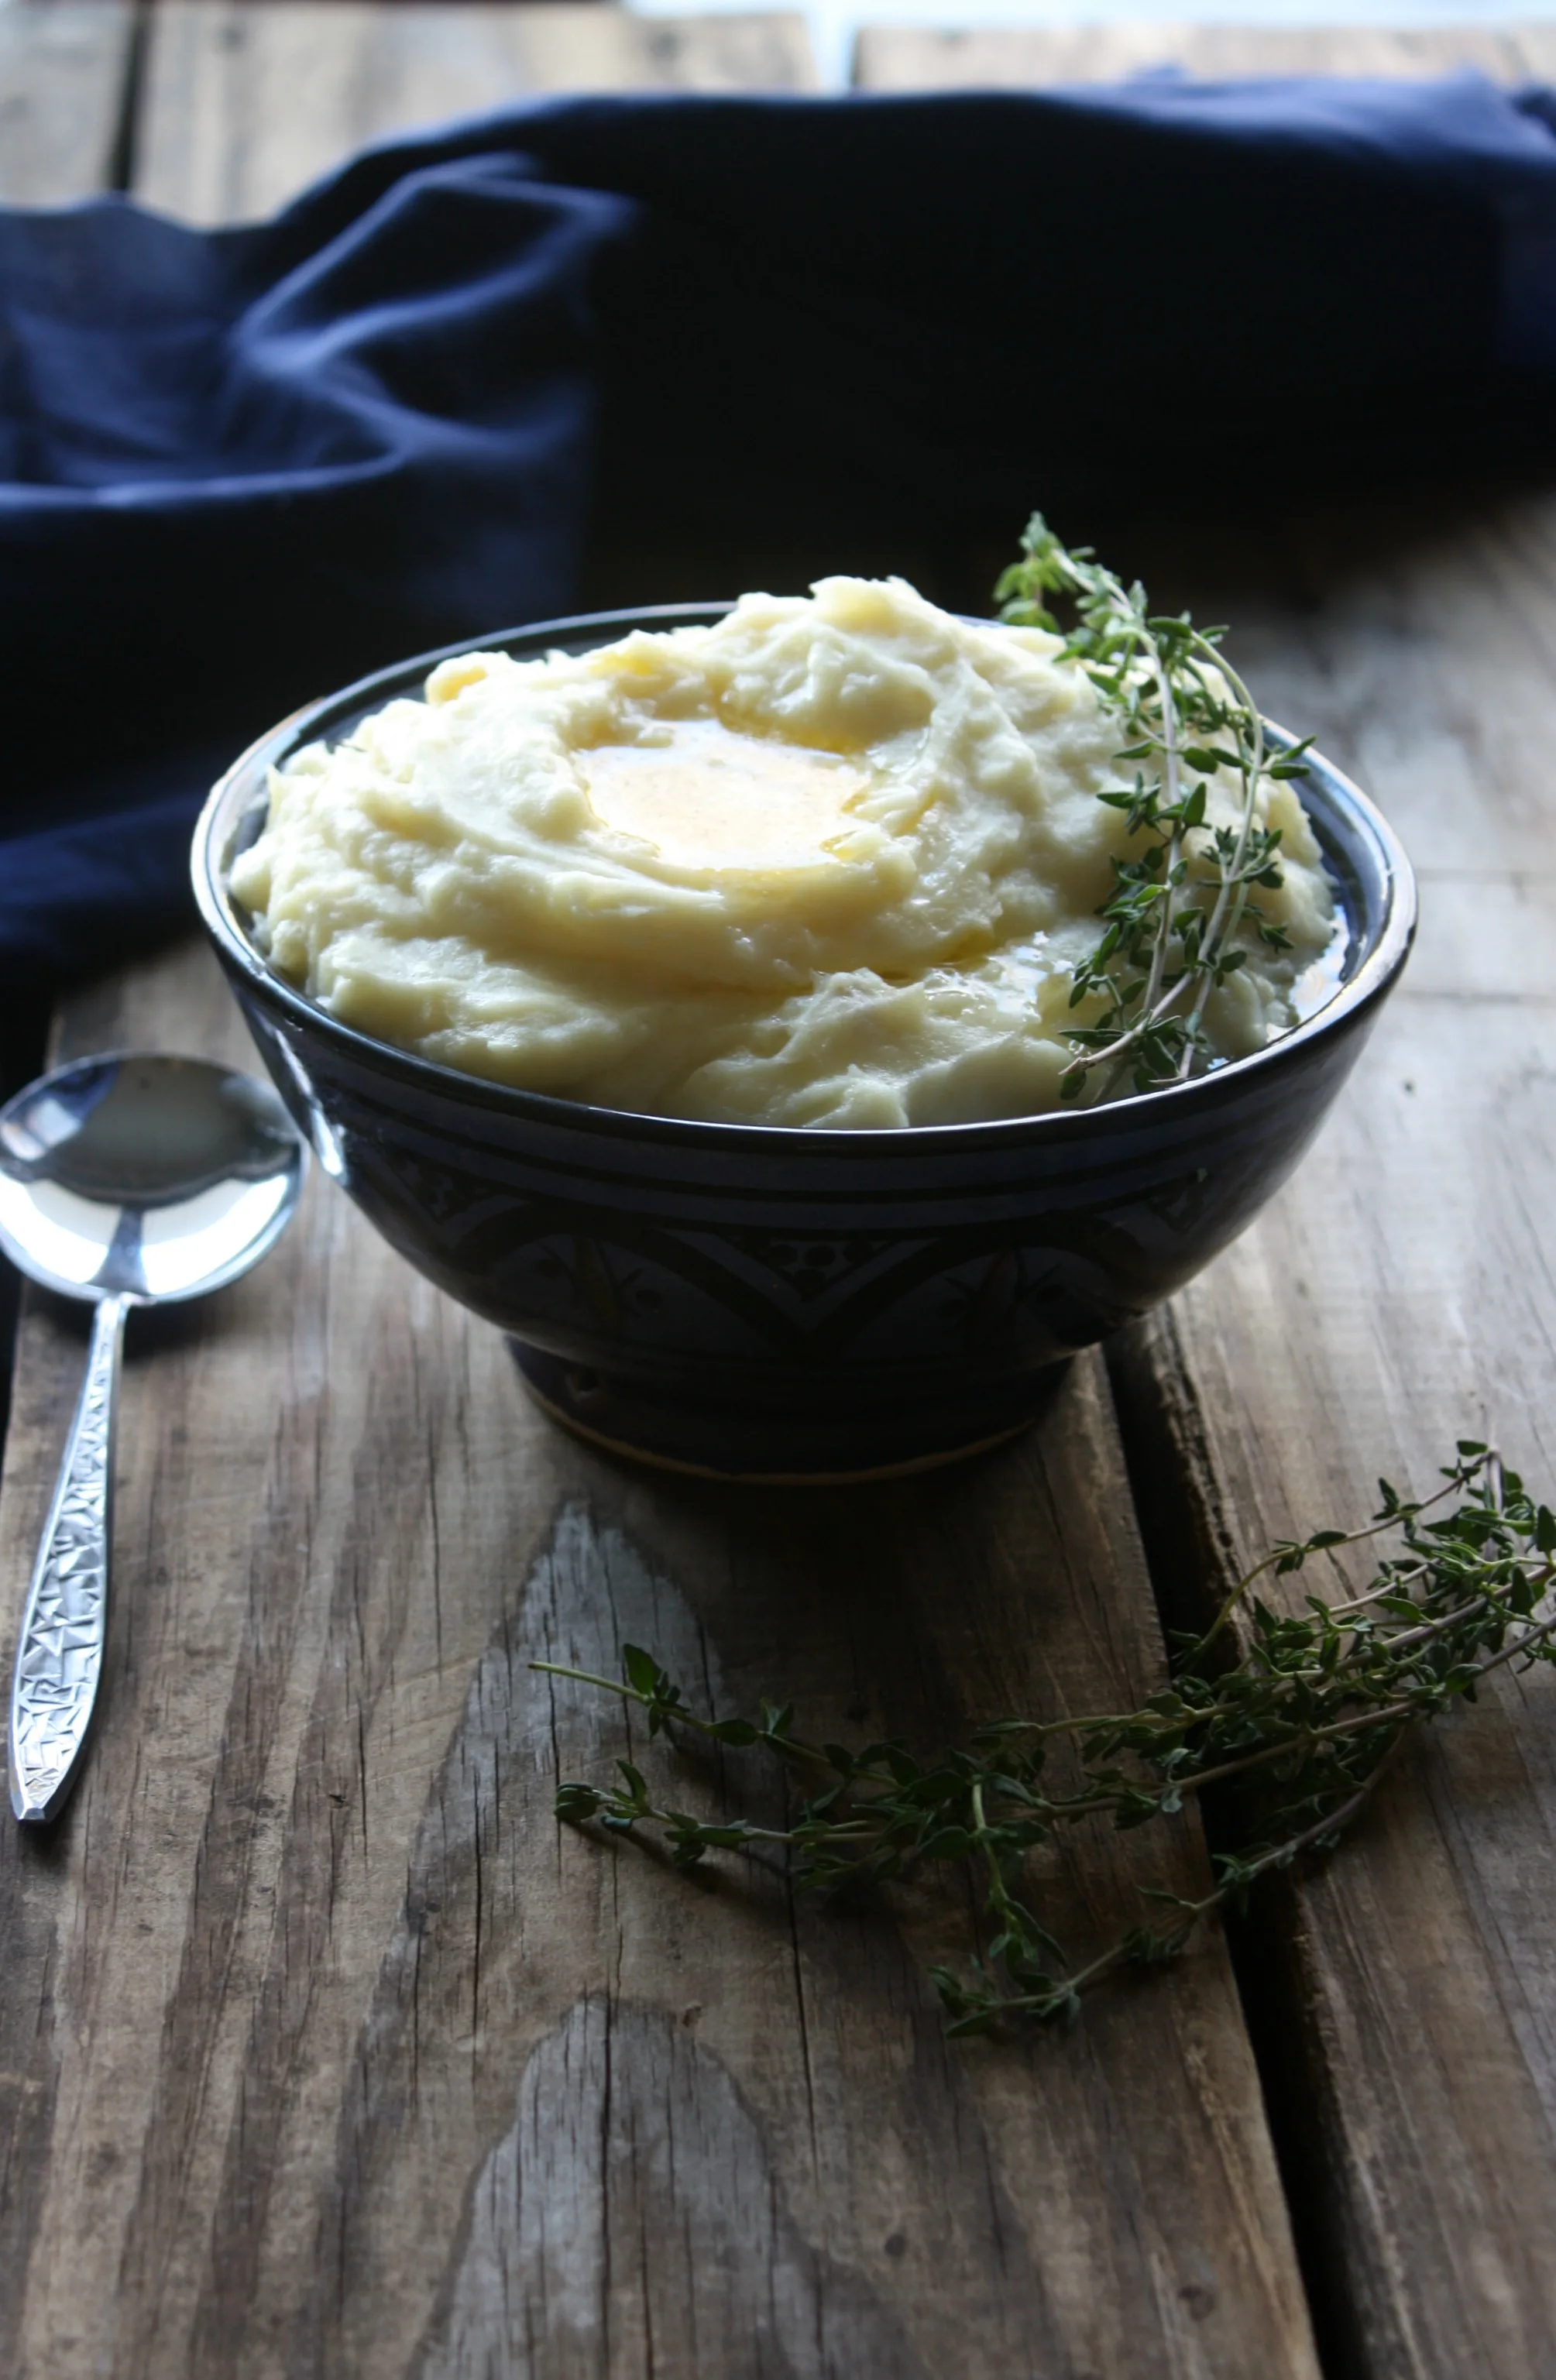 Parsnip Recipe: Mashed Potatoes & Parsnips with Thyme Infused Butter